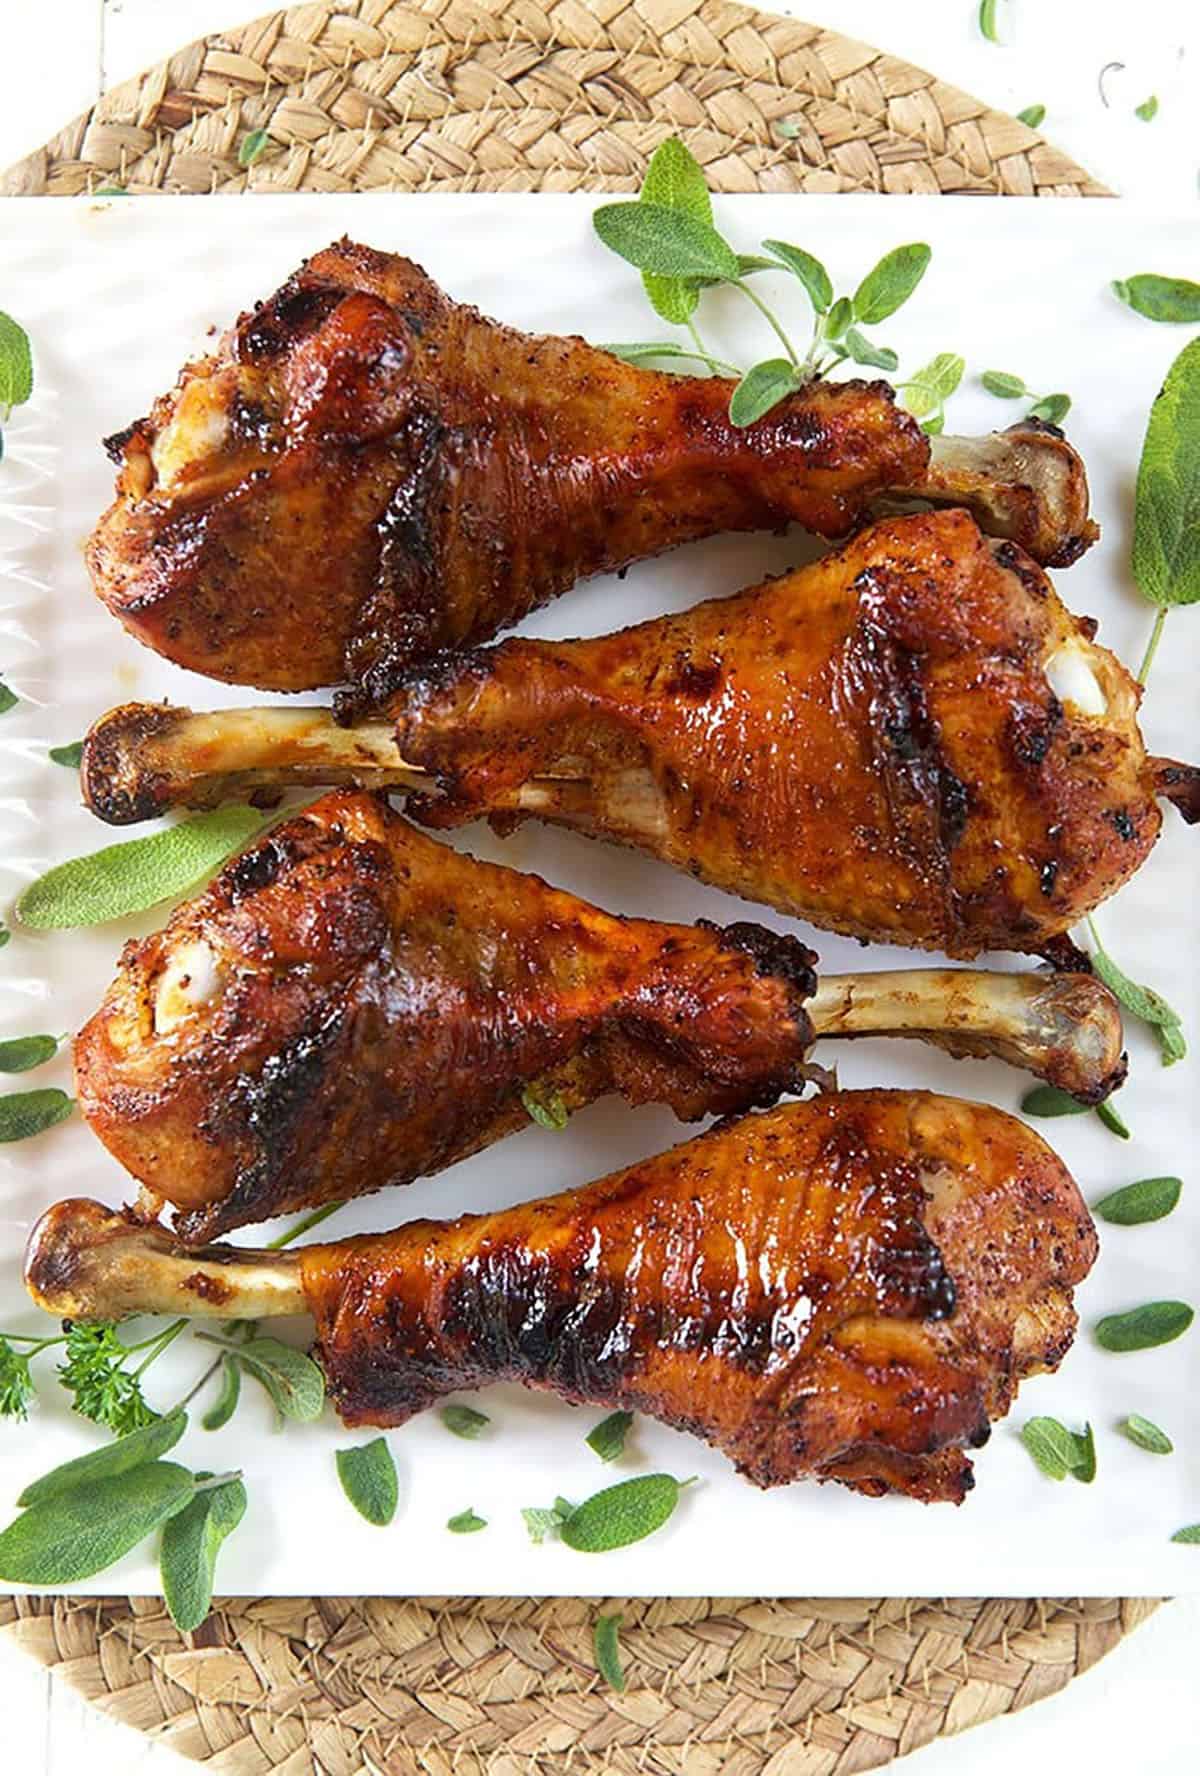 Four roasted turkey legs are on a white plate.